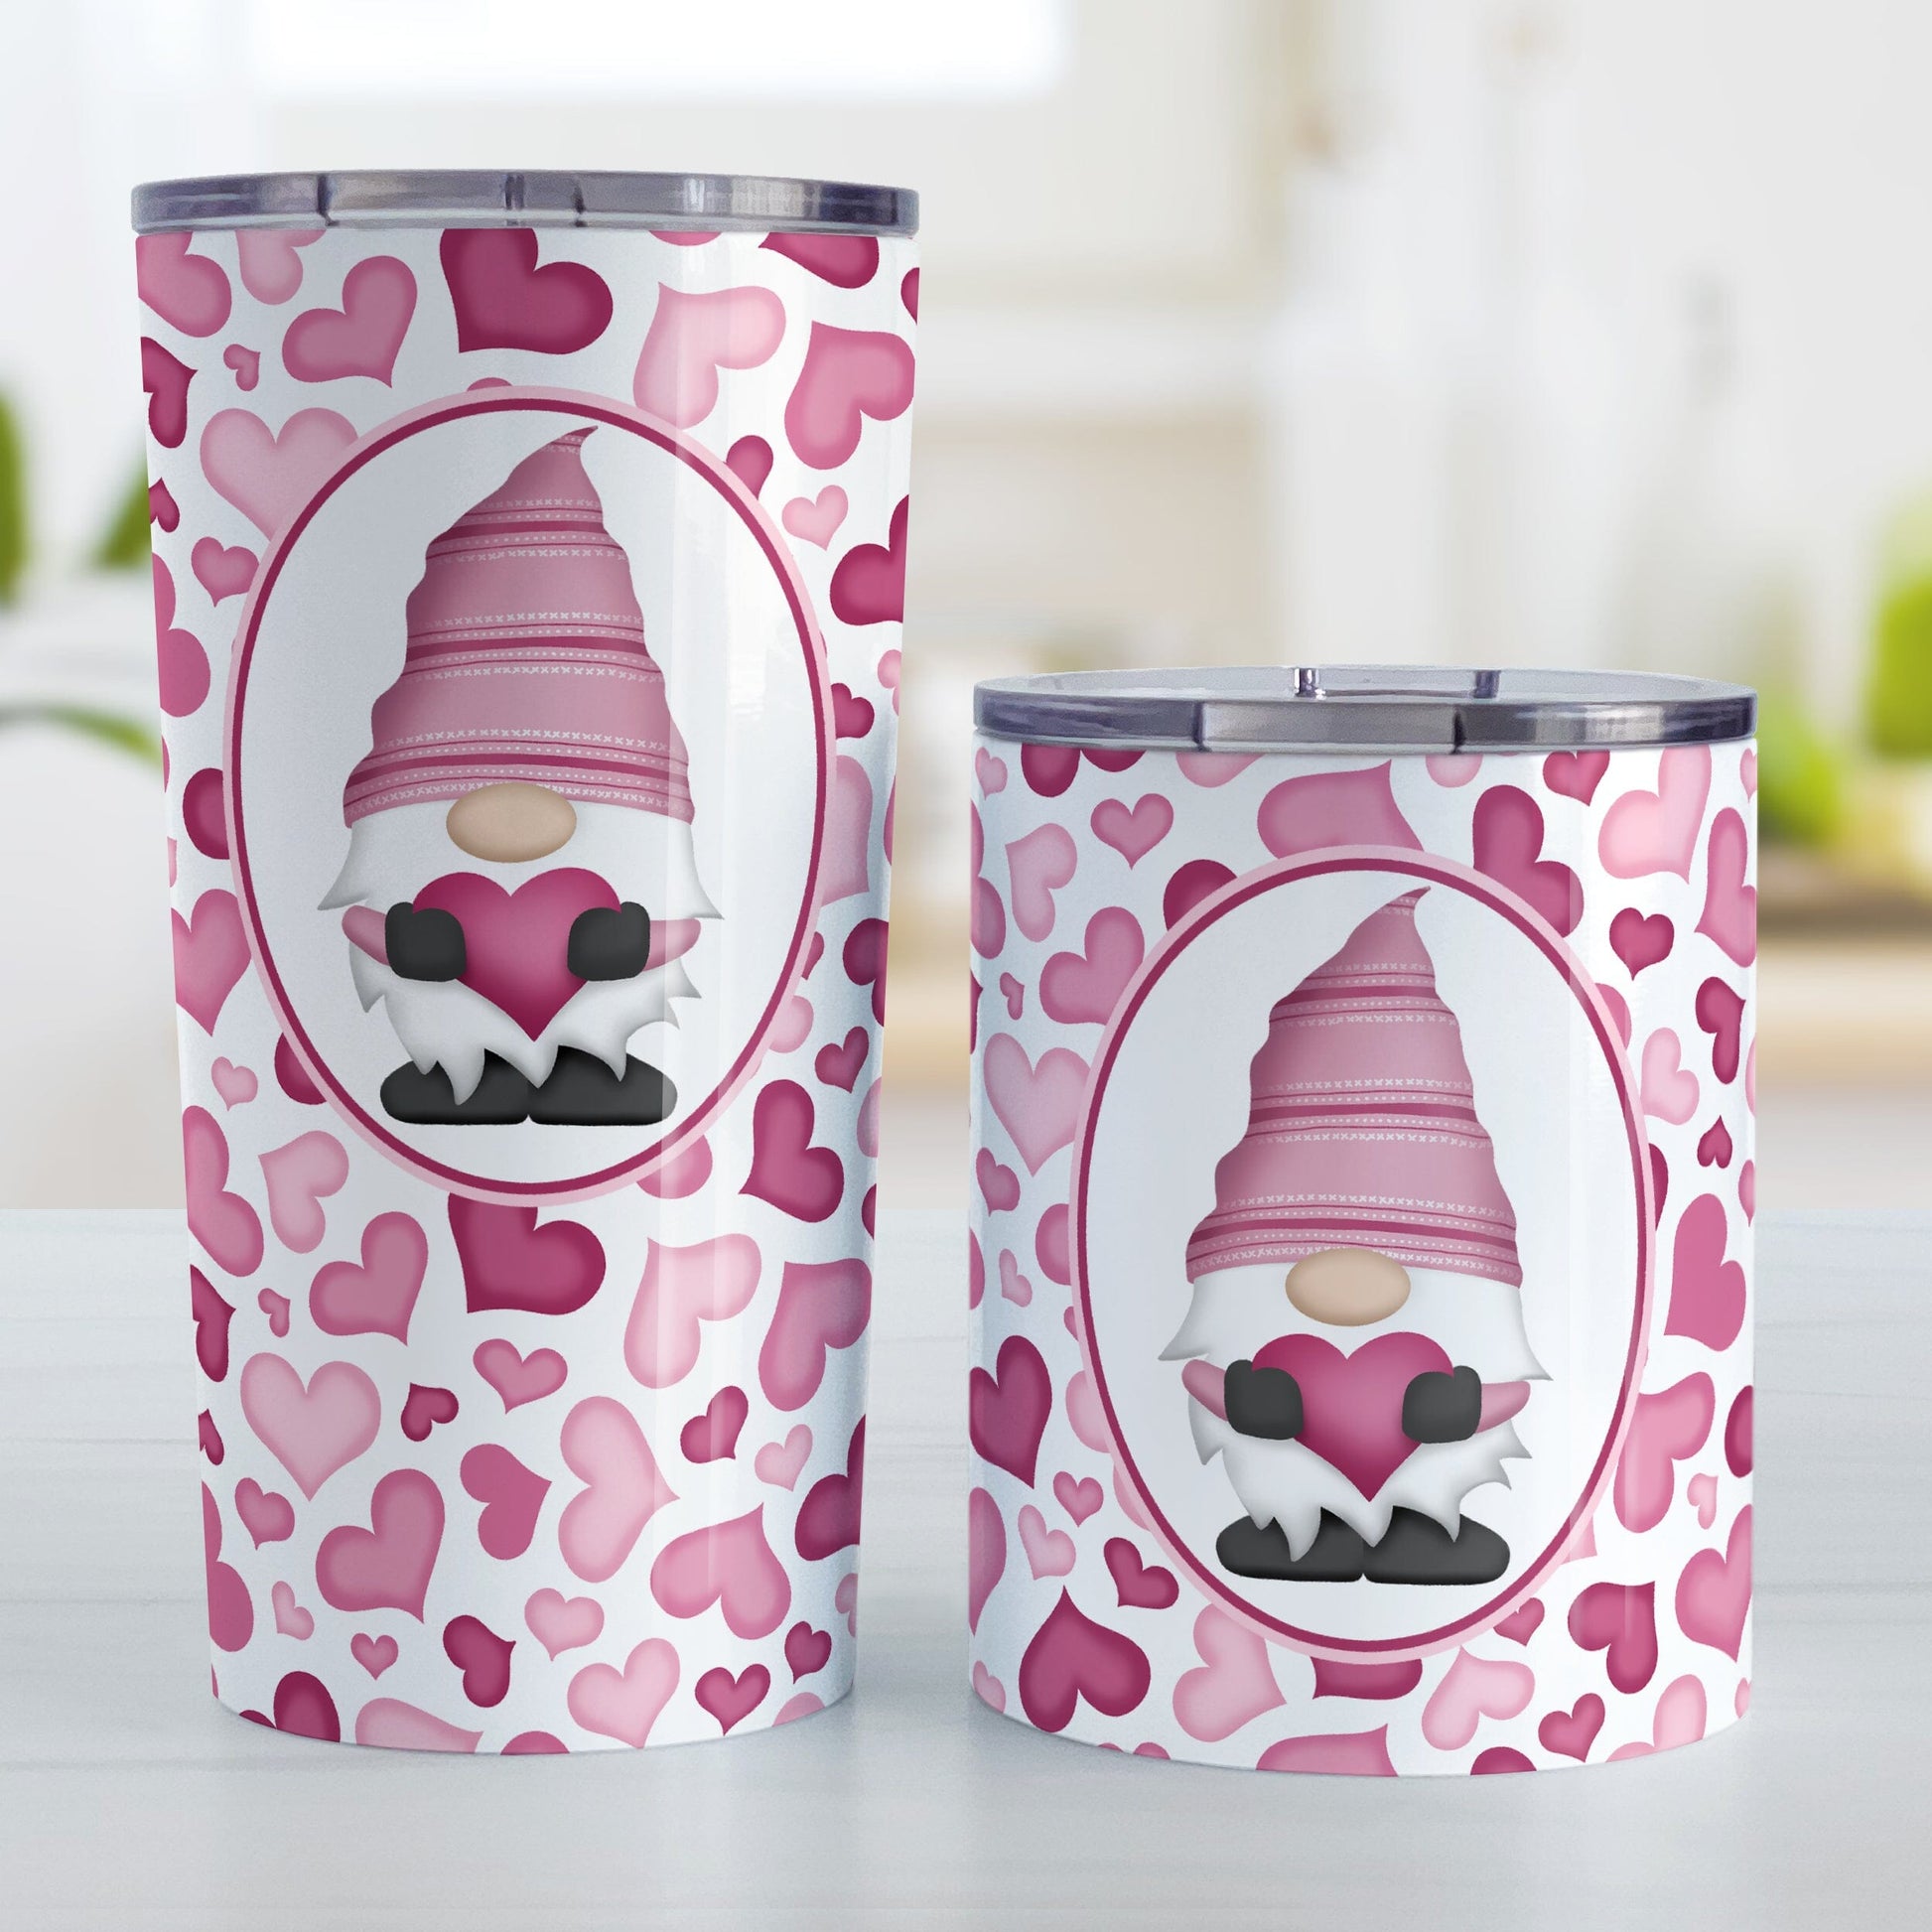 Pink Gnome Hearts Tumbler Cup (20oz or 10oz) at Amy's Coffee Mugs. Stainless steel tumbler cups designed with an adorable pink gnome holding a heart in a white oval over a pattern of cute hearts in different shades of pink that wrap around the cups. Photo shows both sized cups next to each other on a table.